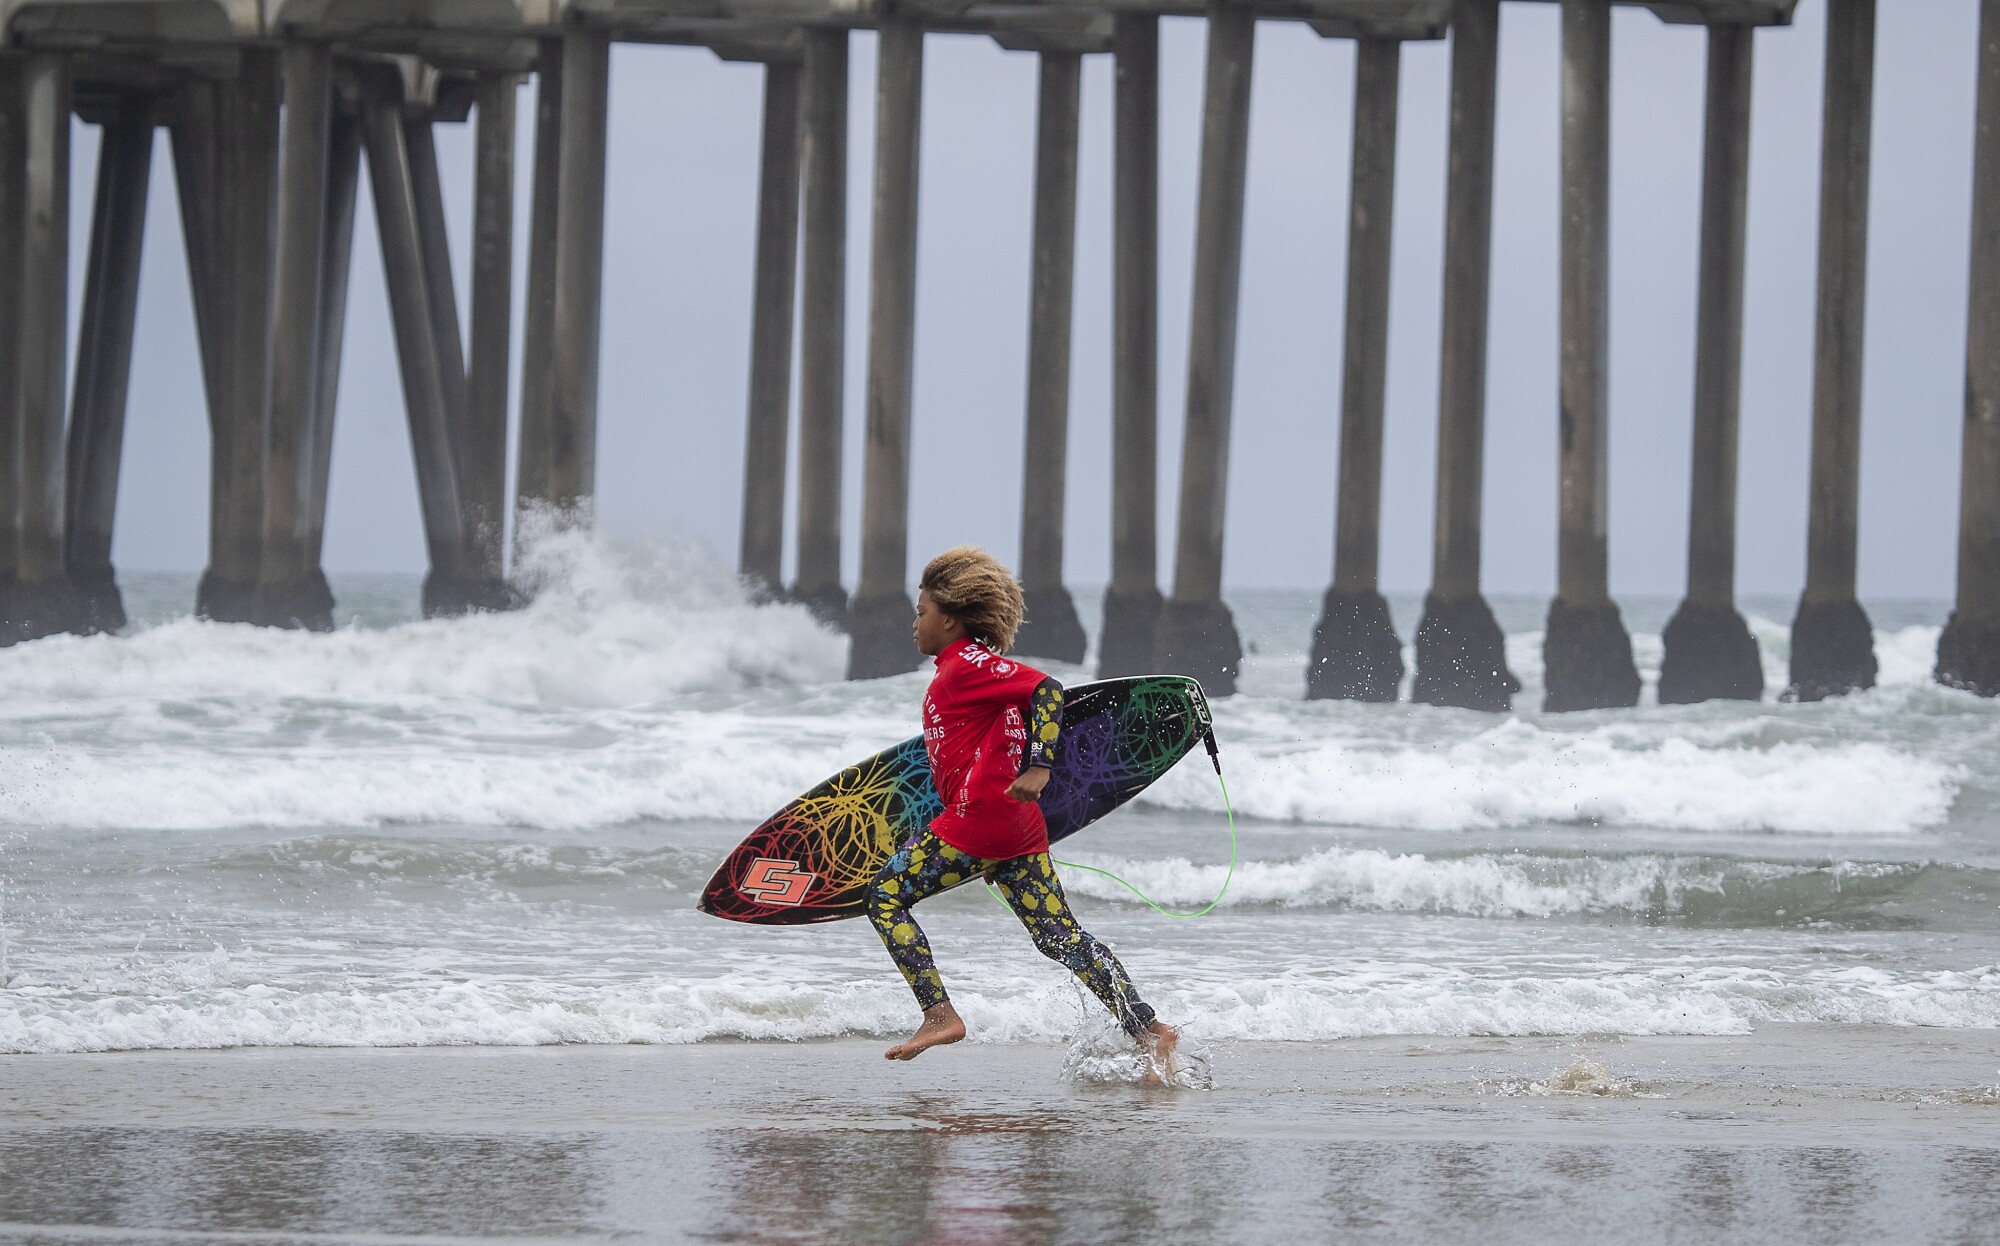 Matthew Oliveira, 10, runs out to compete in the junior surf competition during "A Great Day in the Stoke."